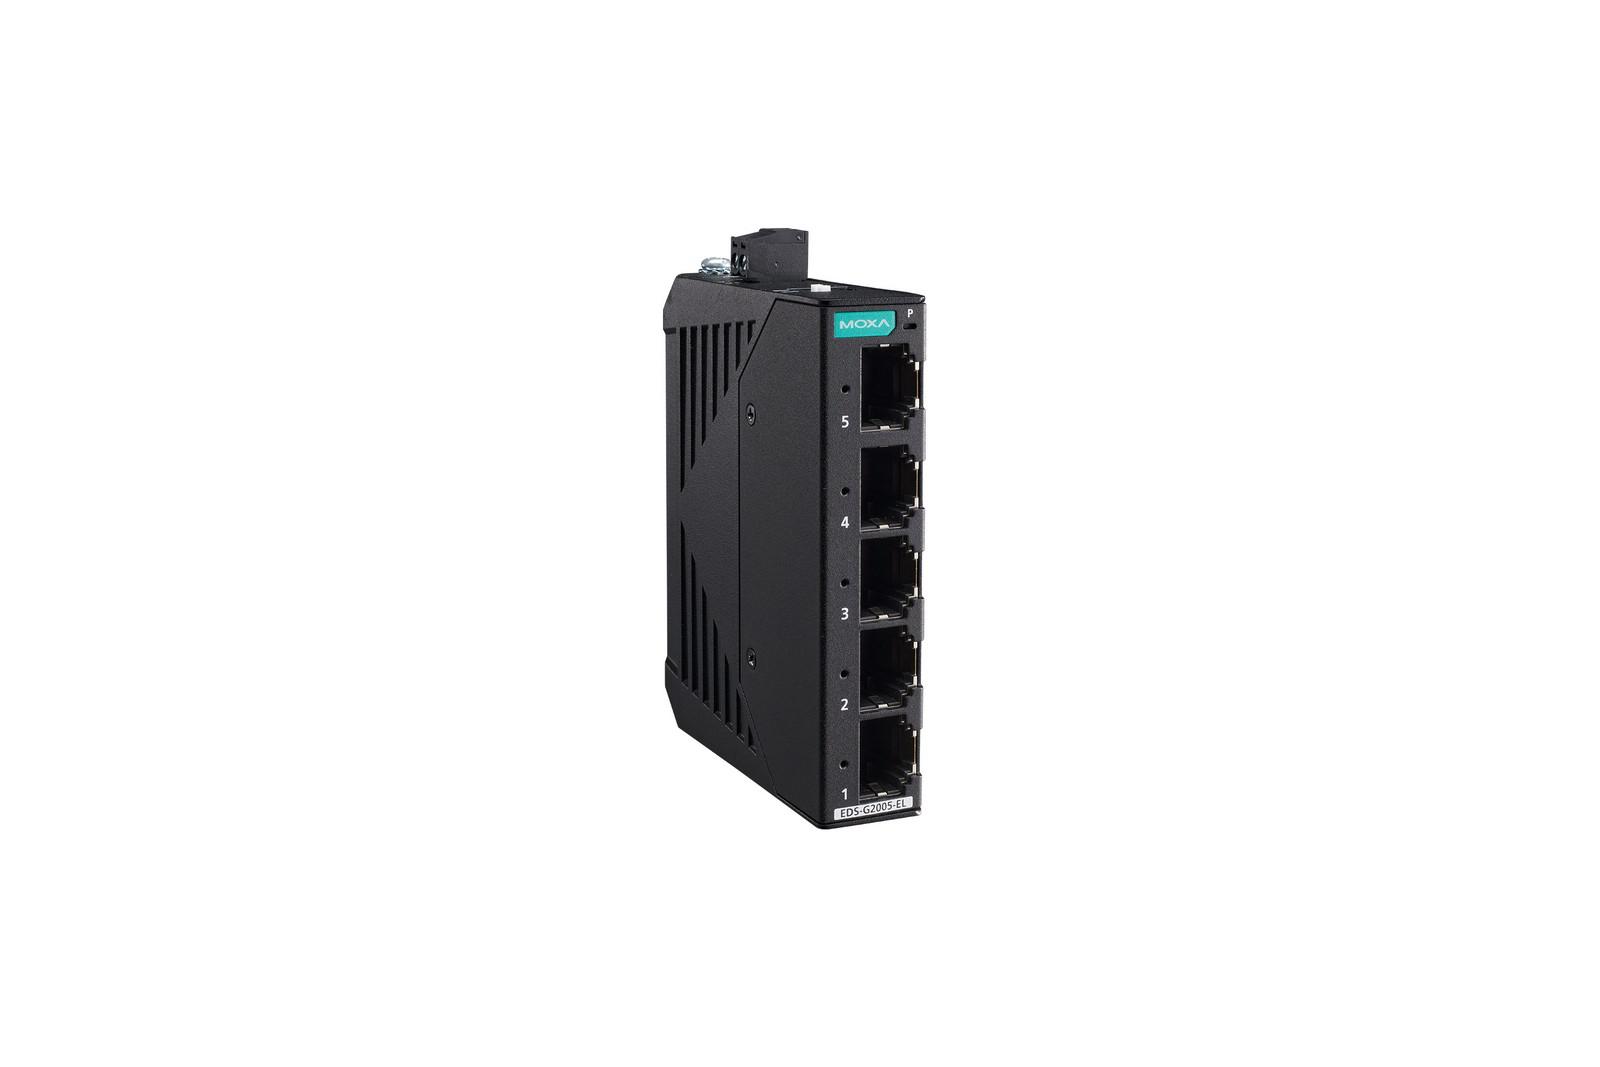 EDS-G2005-EL Series 5-port  entry-level unmanaged full Gigabit Ethernet switches with metal housing